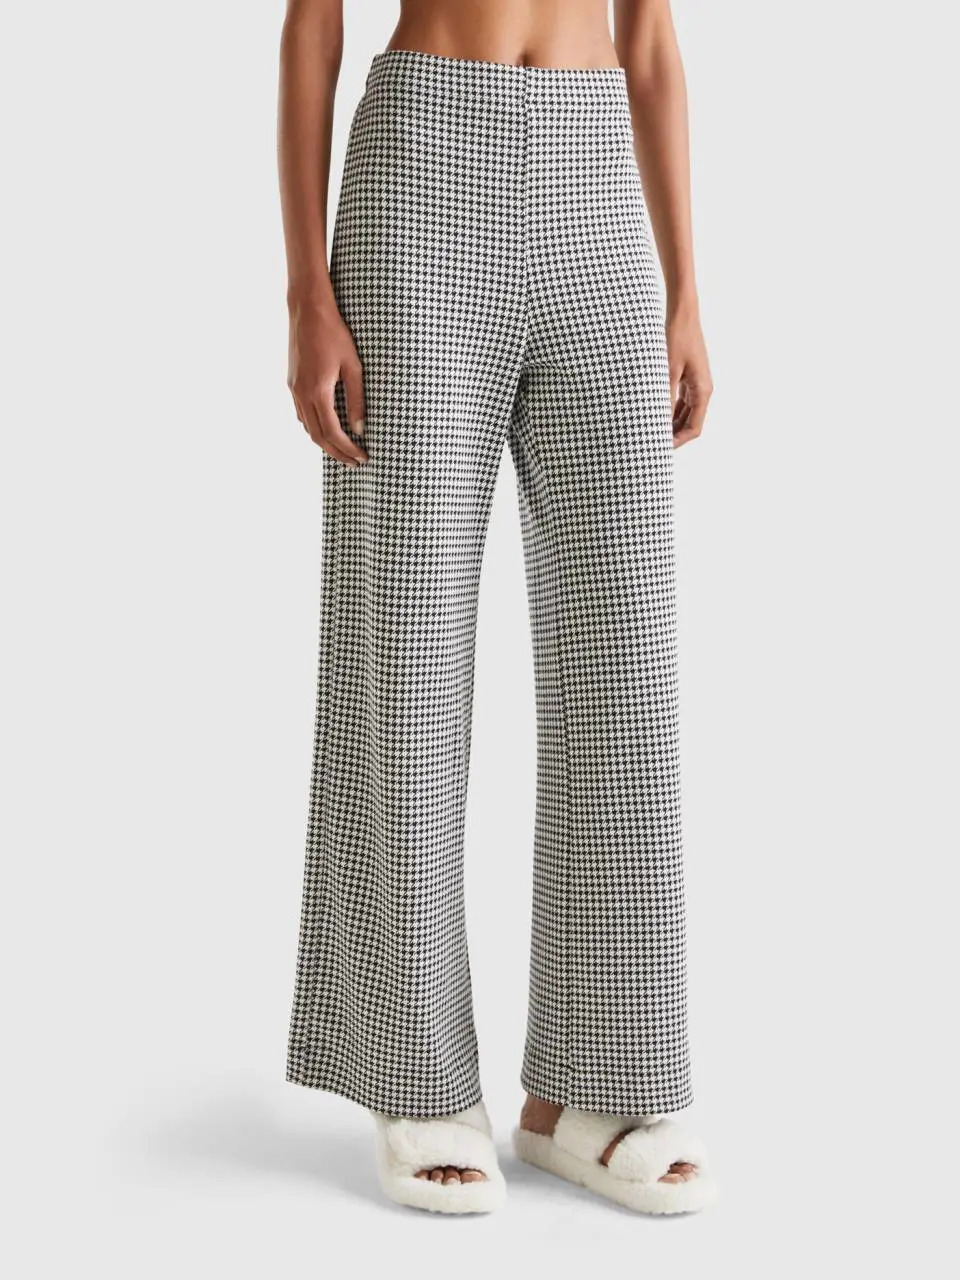 Benetton palazzo houndstooth trousers. 1